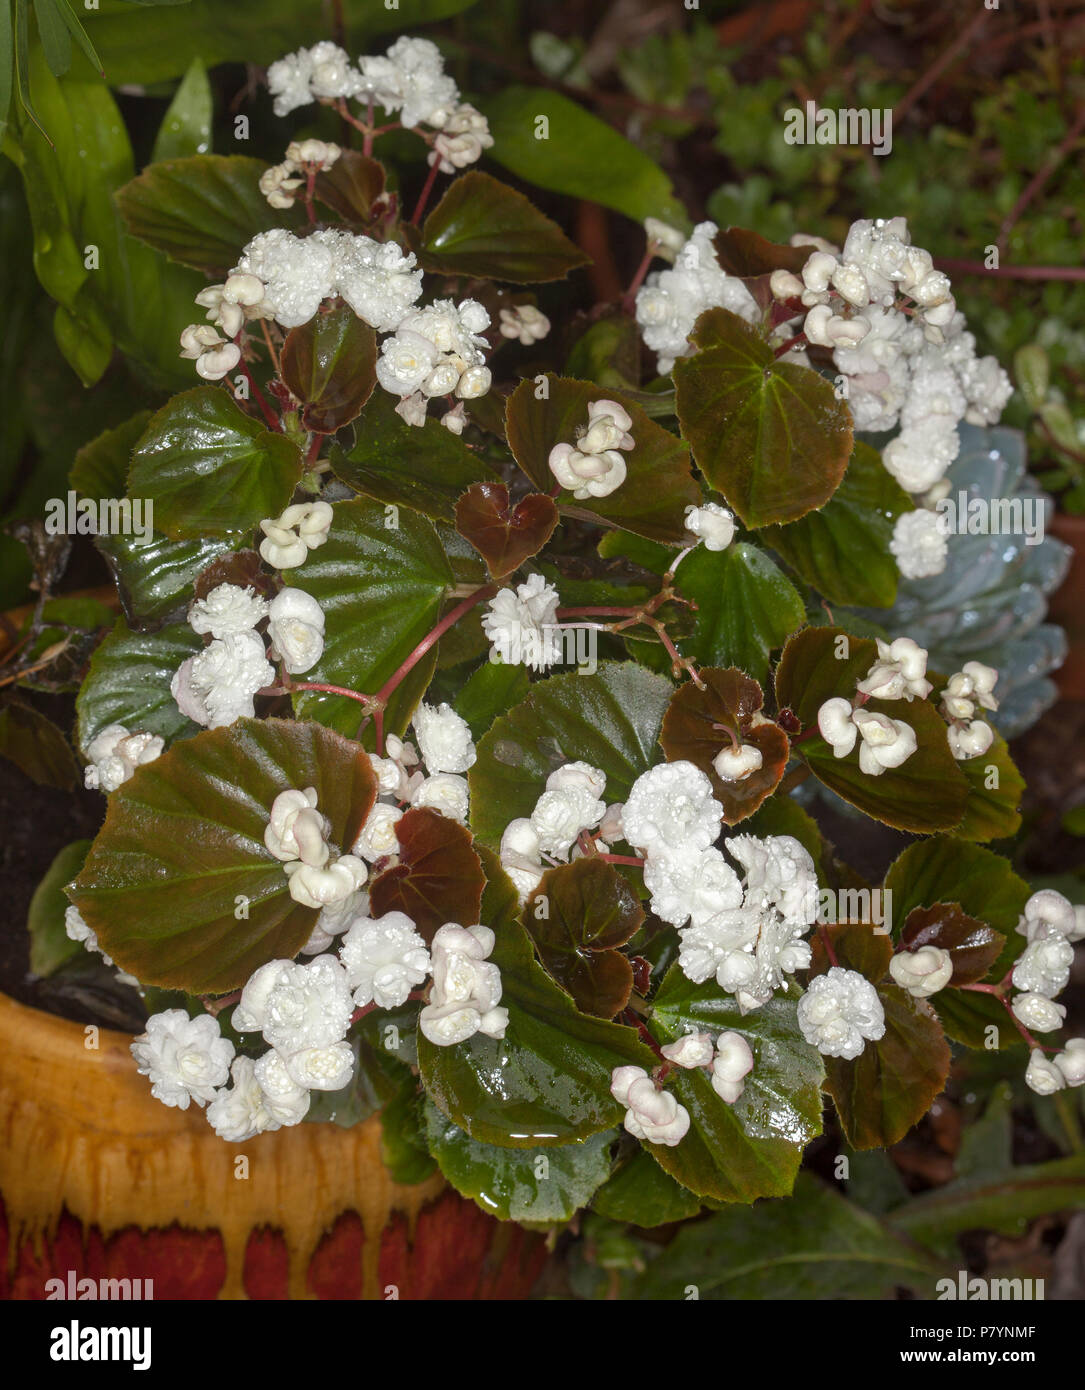 Mass of double white flowers and dark green red tinged leaves of bedding begonia, Begonia semperflorens, in decorative container Stock Photo